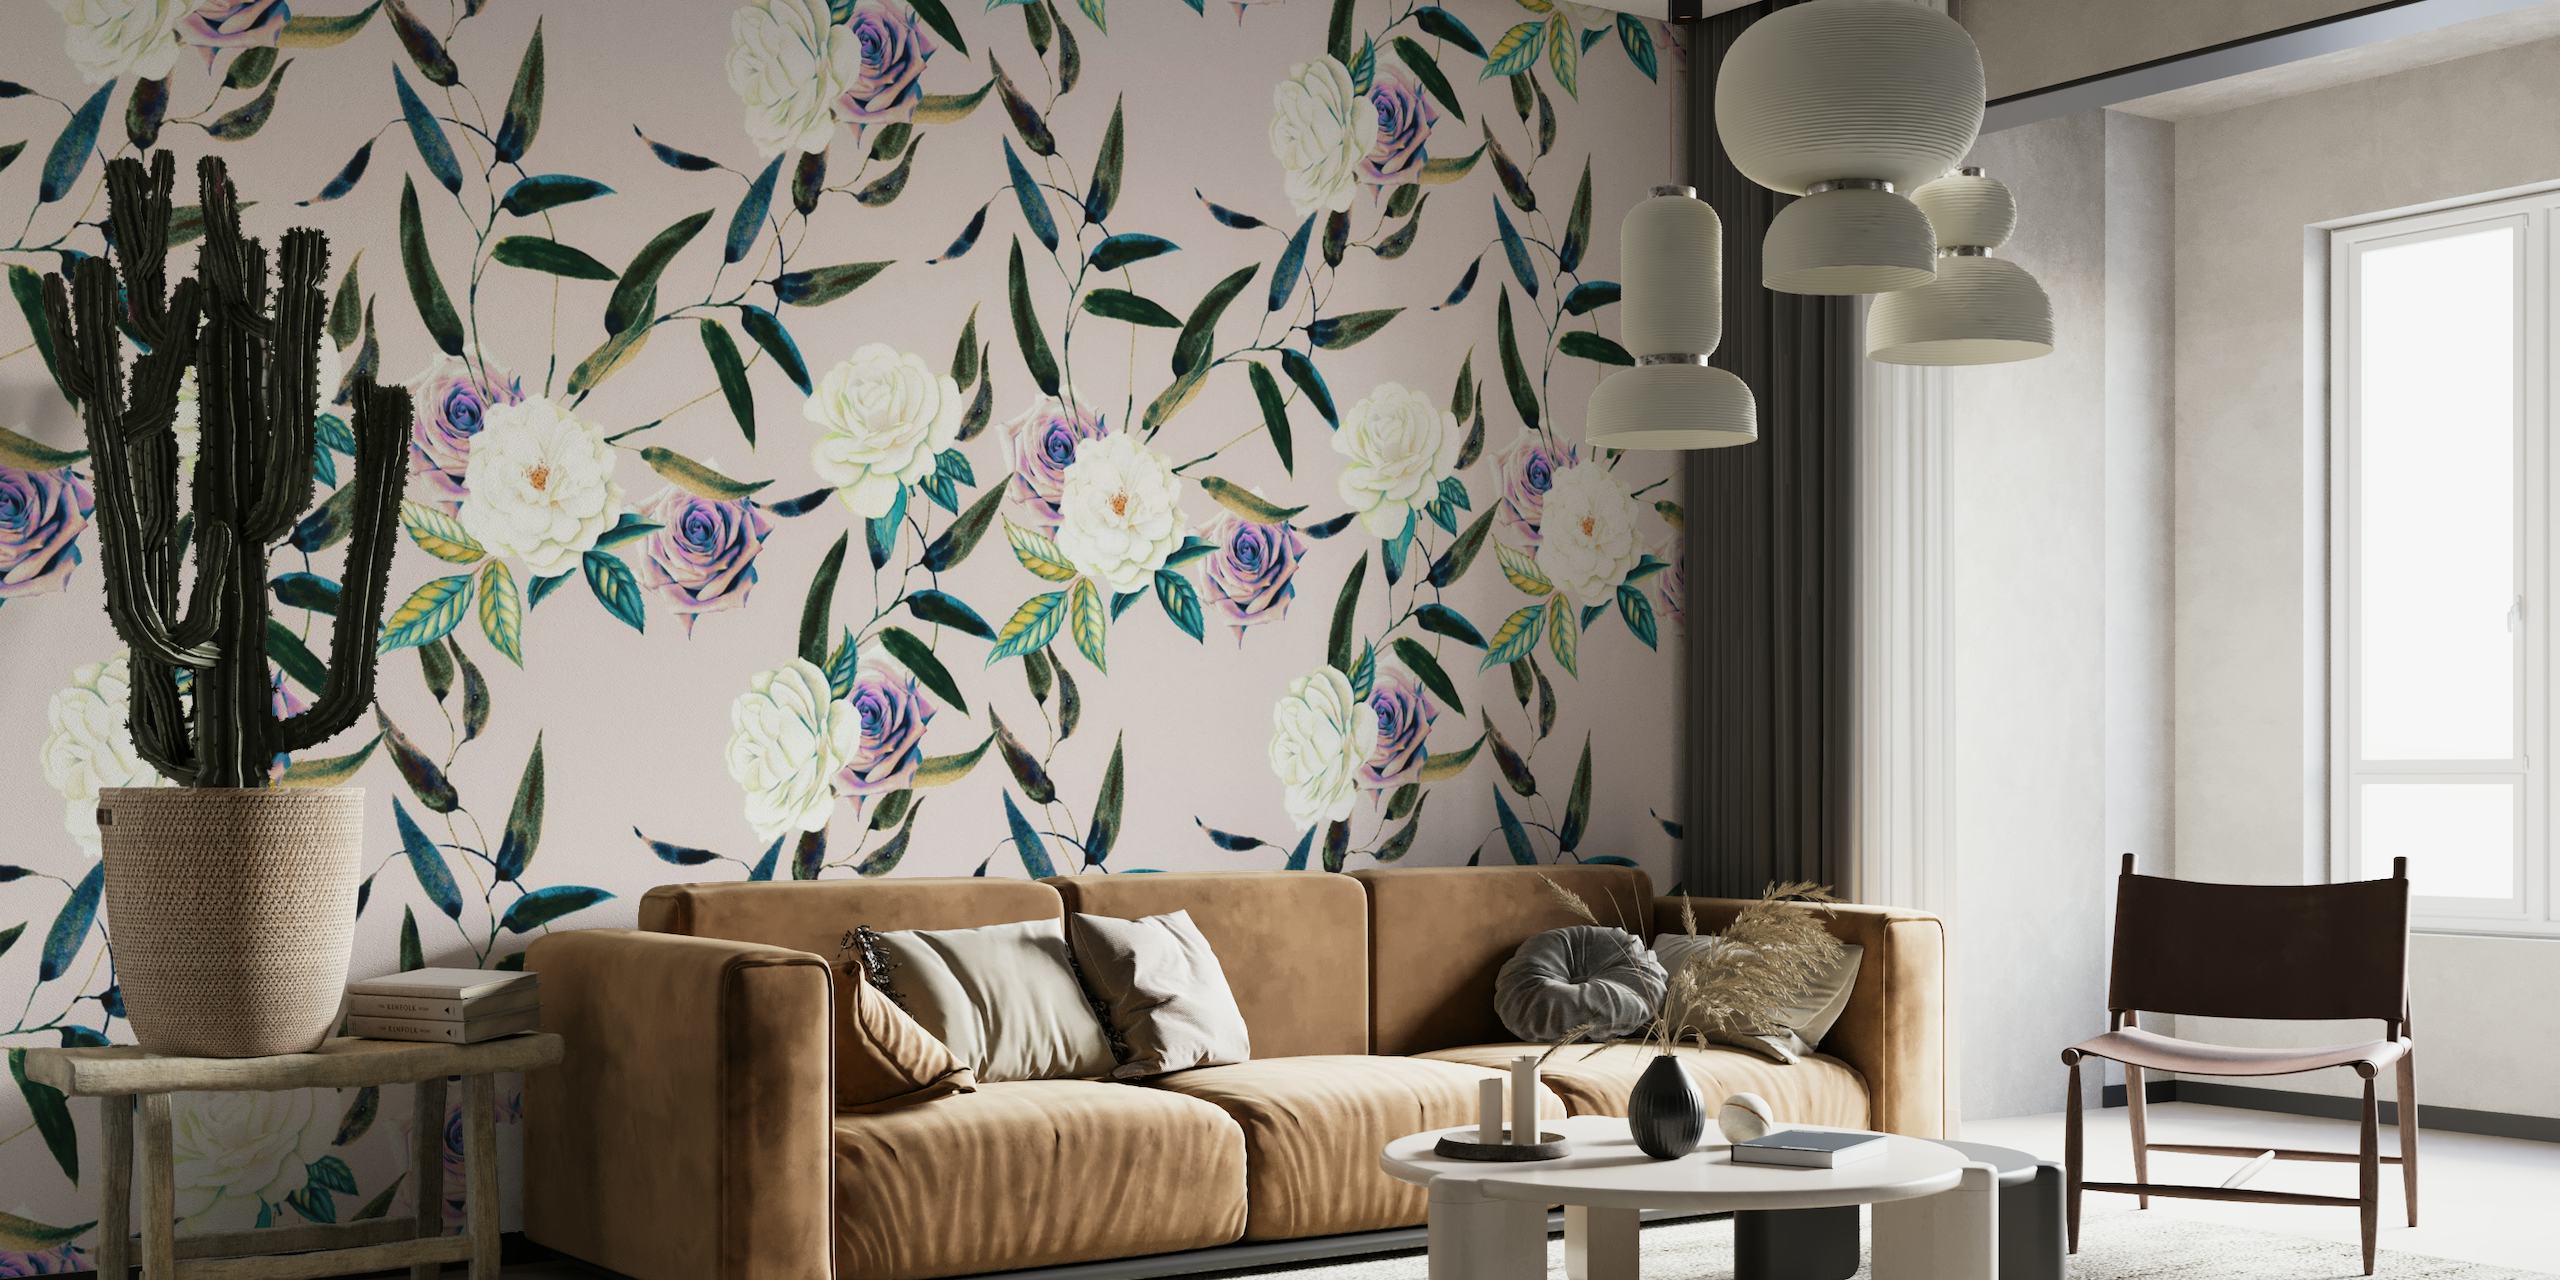 Elegant Blooming Flowers Wall Mural with pastel tones and lush floral design